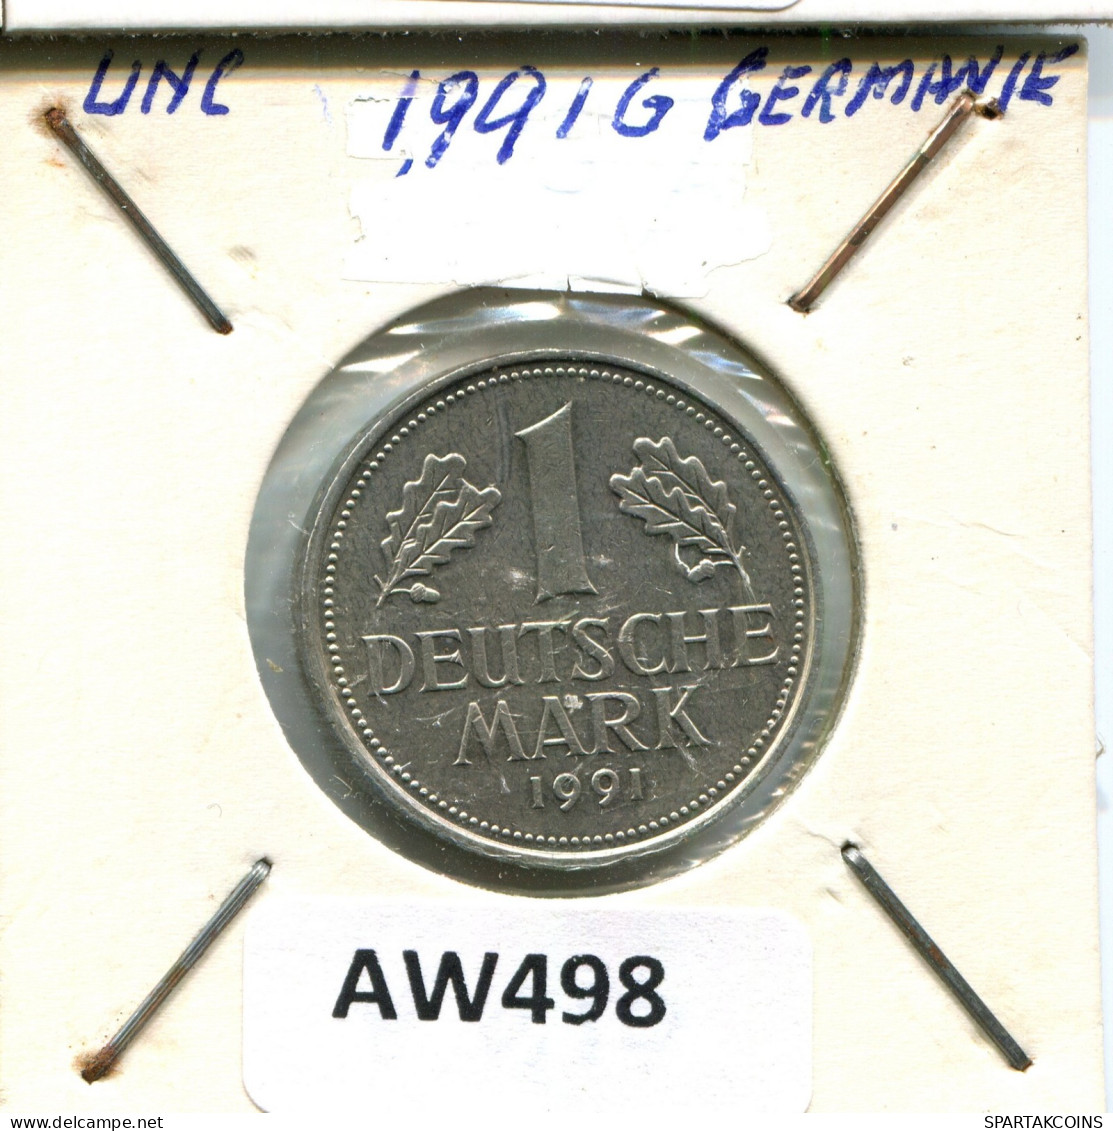 1 DM 1991 G GERMANY Coin #AW498.U.A - 1 Marco